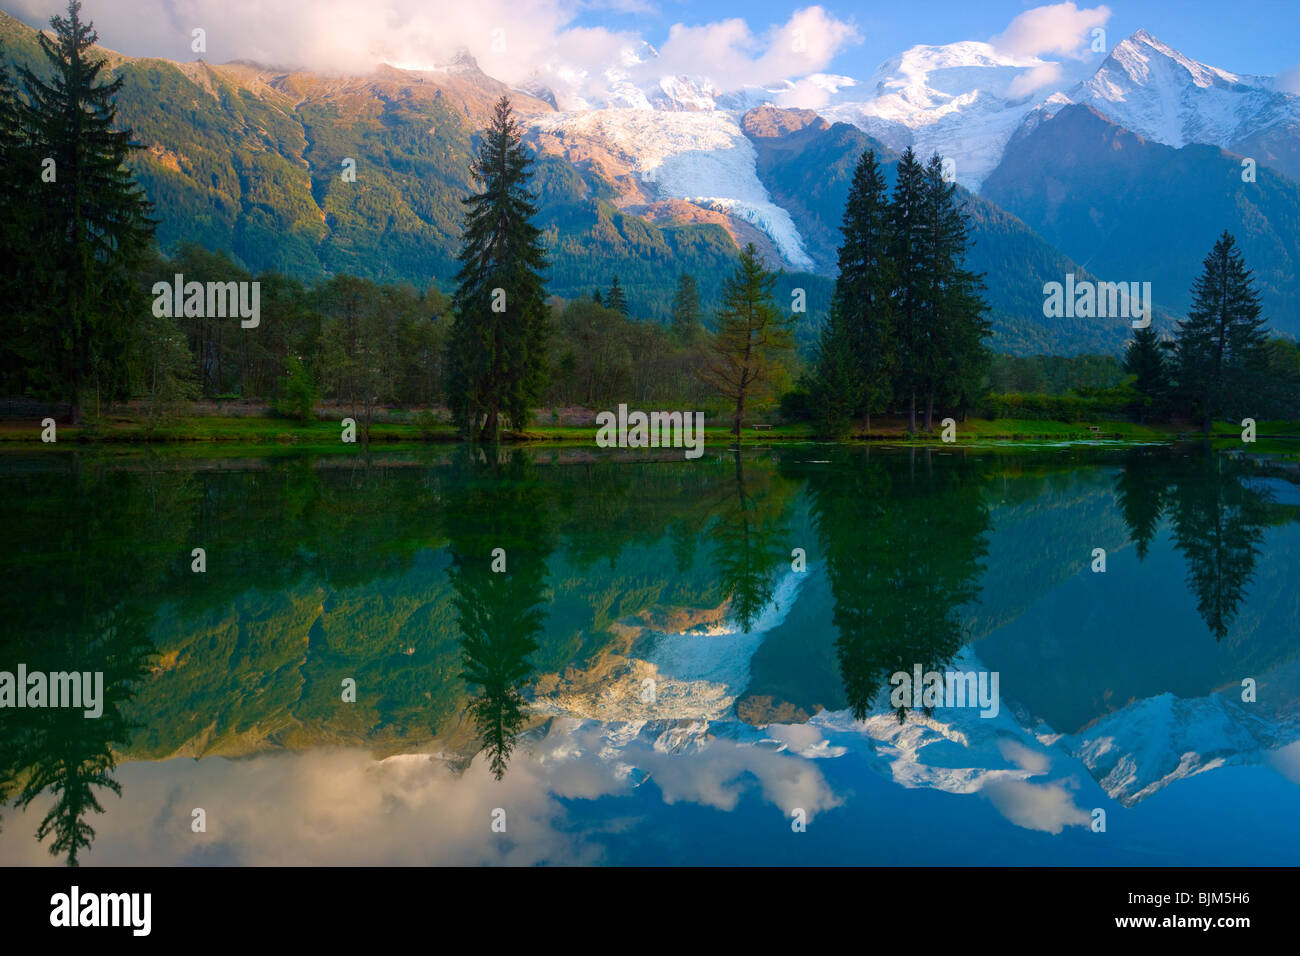 Mt. Blanc reflected in lake, French Alps, France, Highest peak in Western Europe, Seen from Chamonix Valley Stock Photo